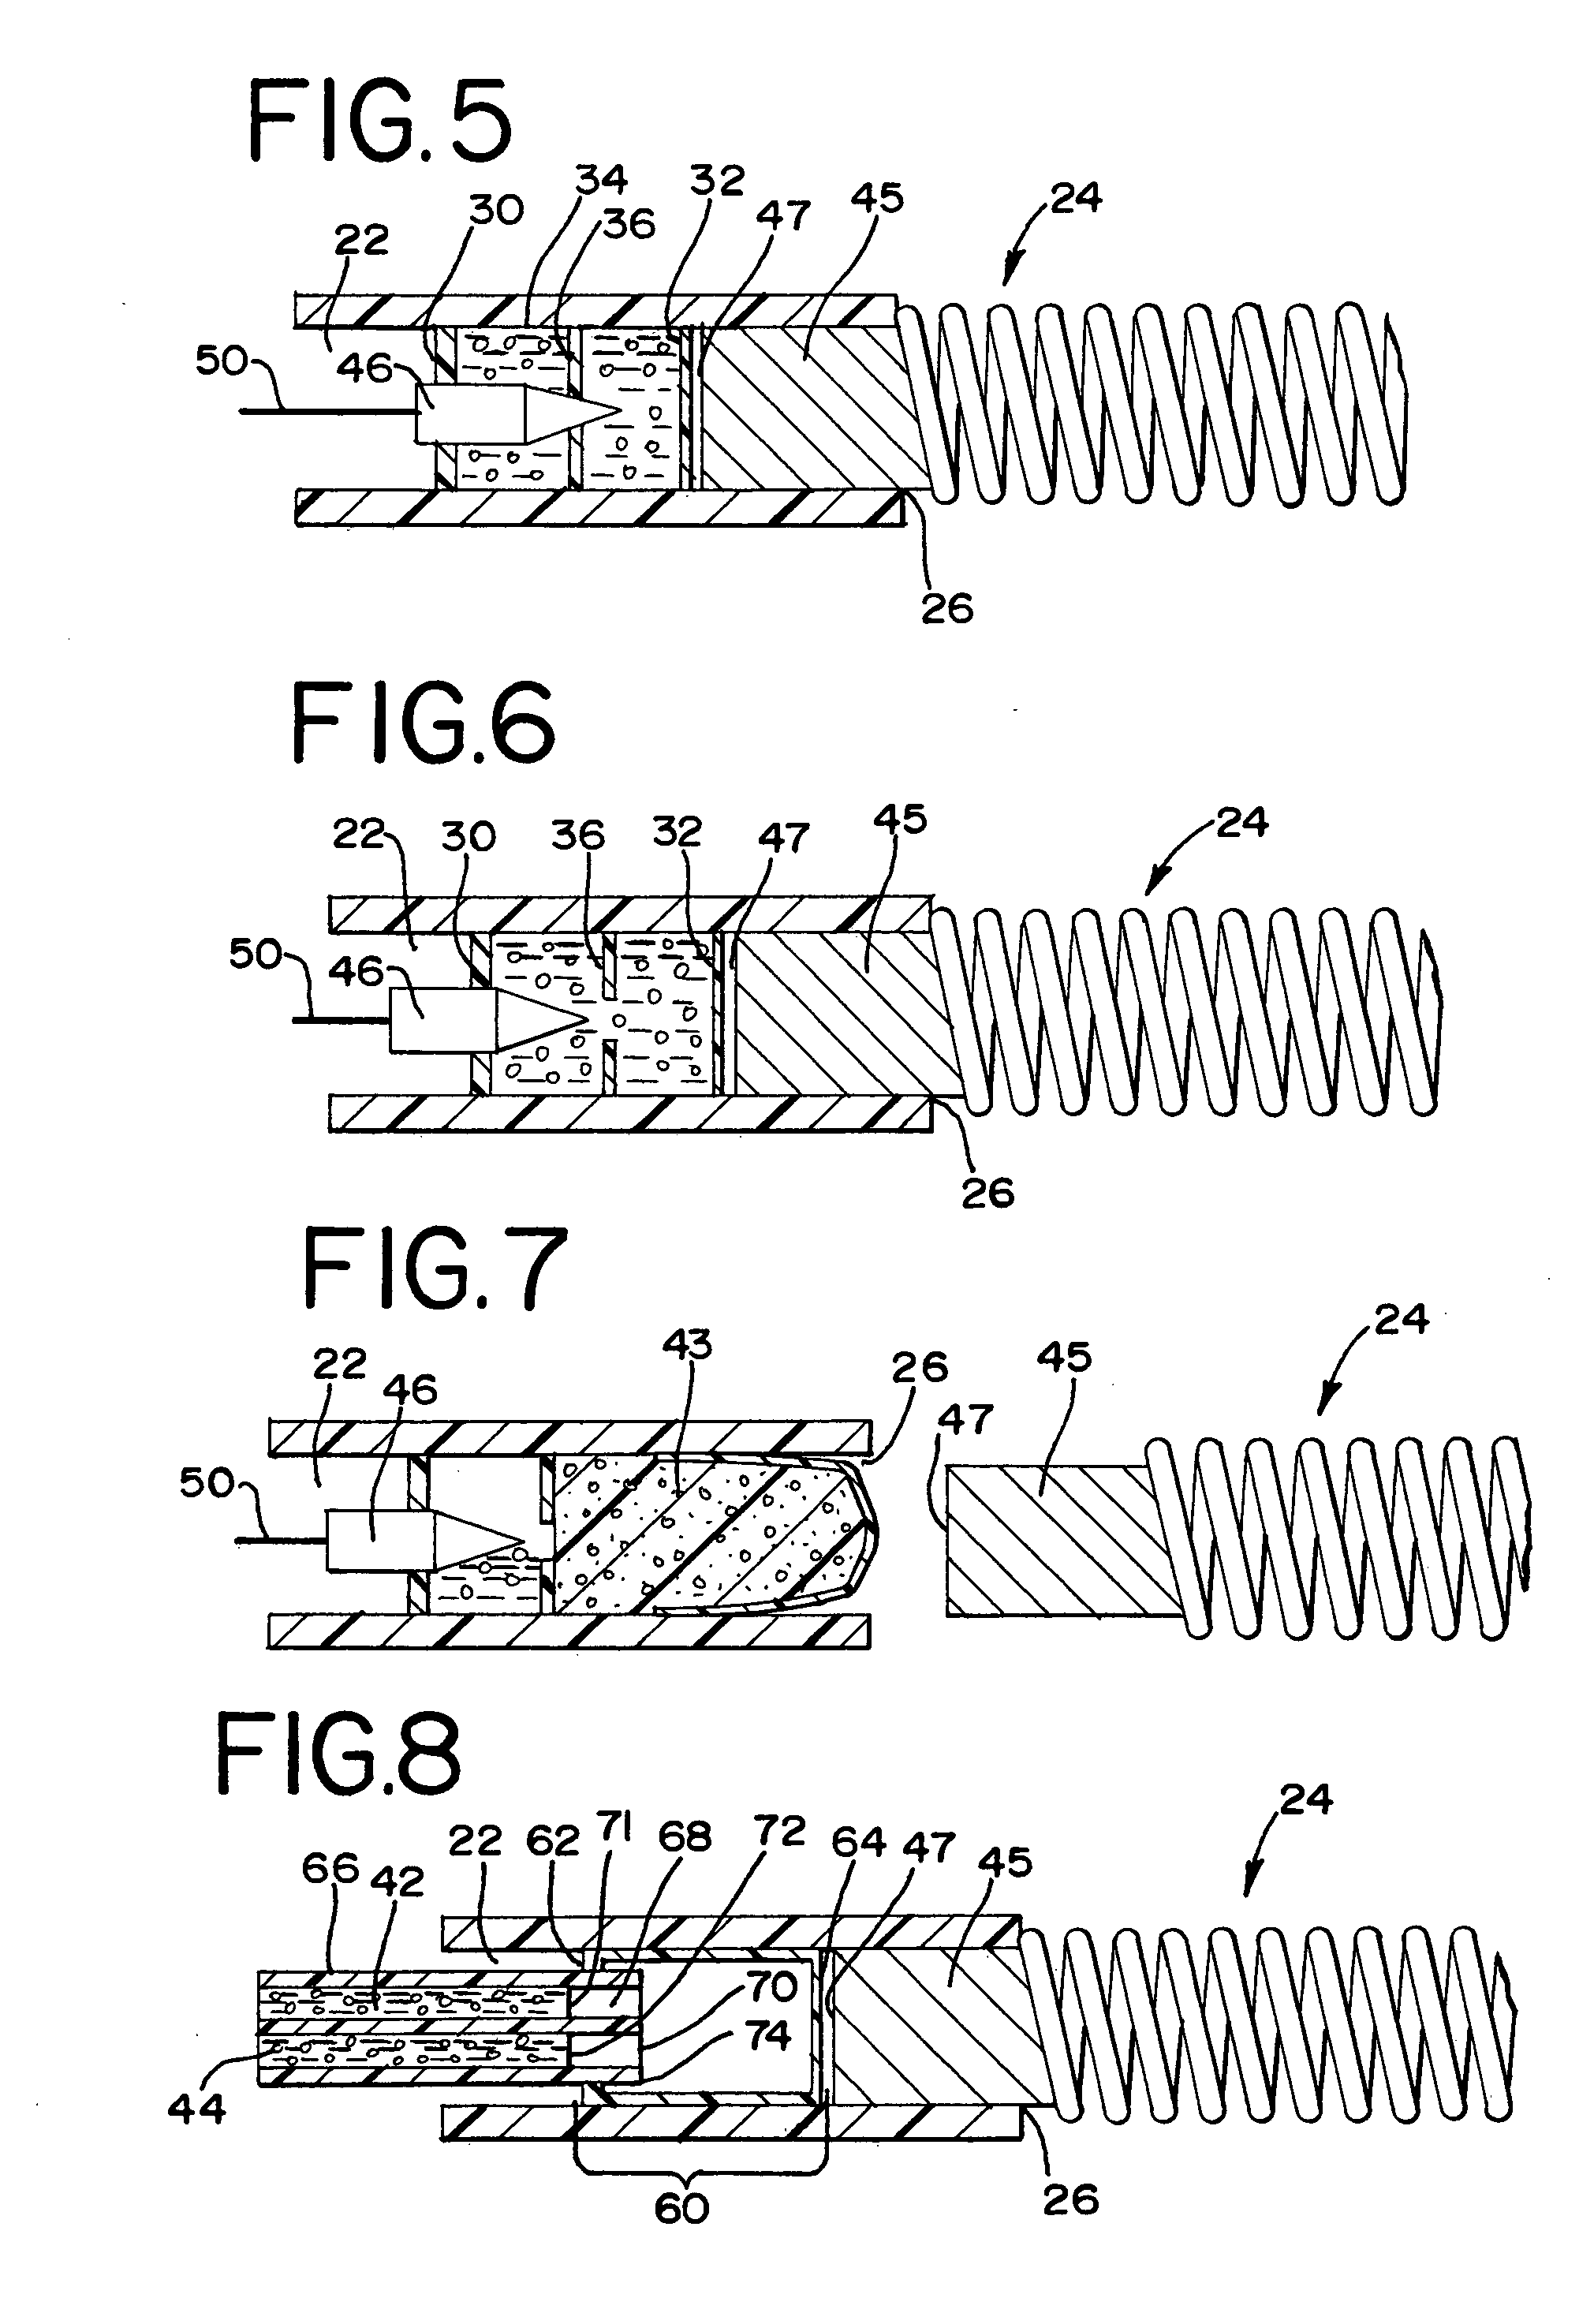 Chemically based vascular occlusion device deployment